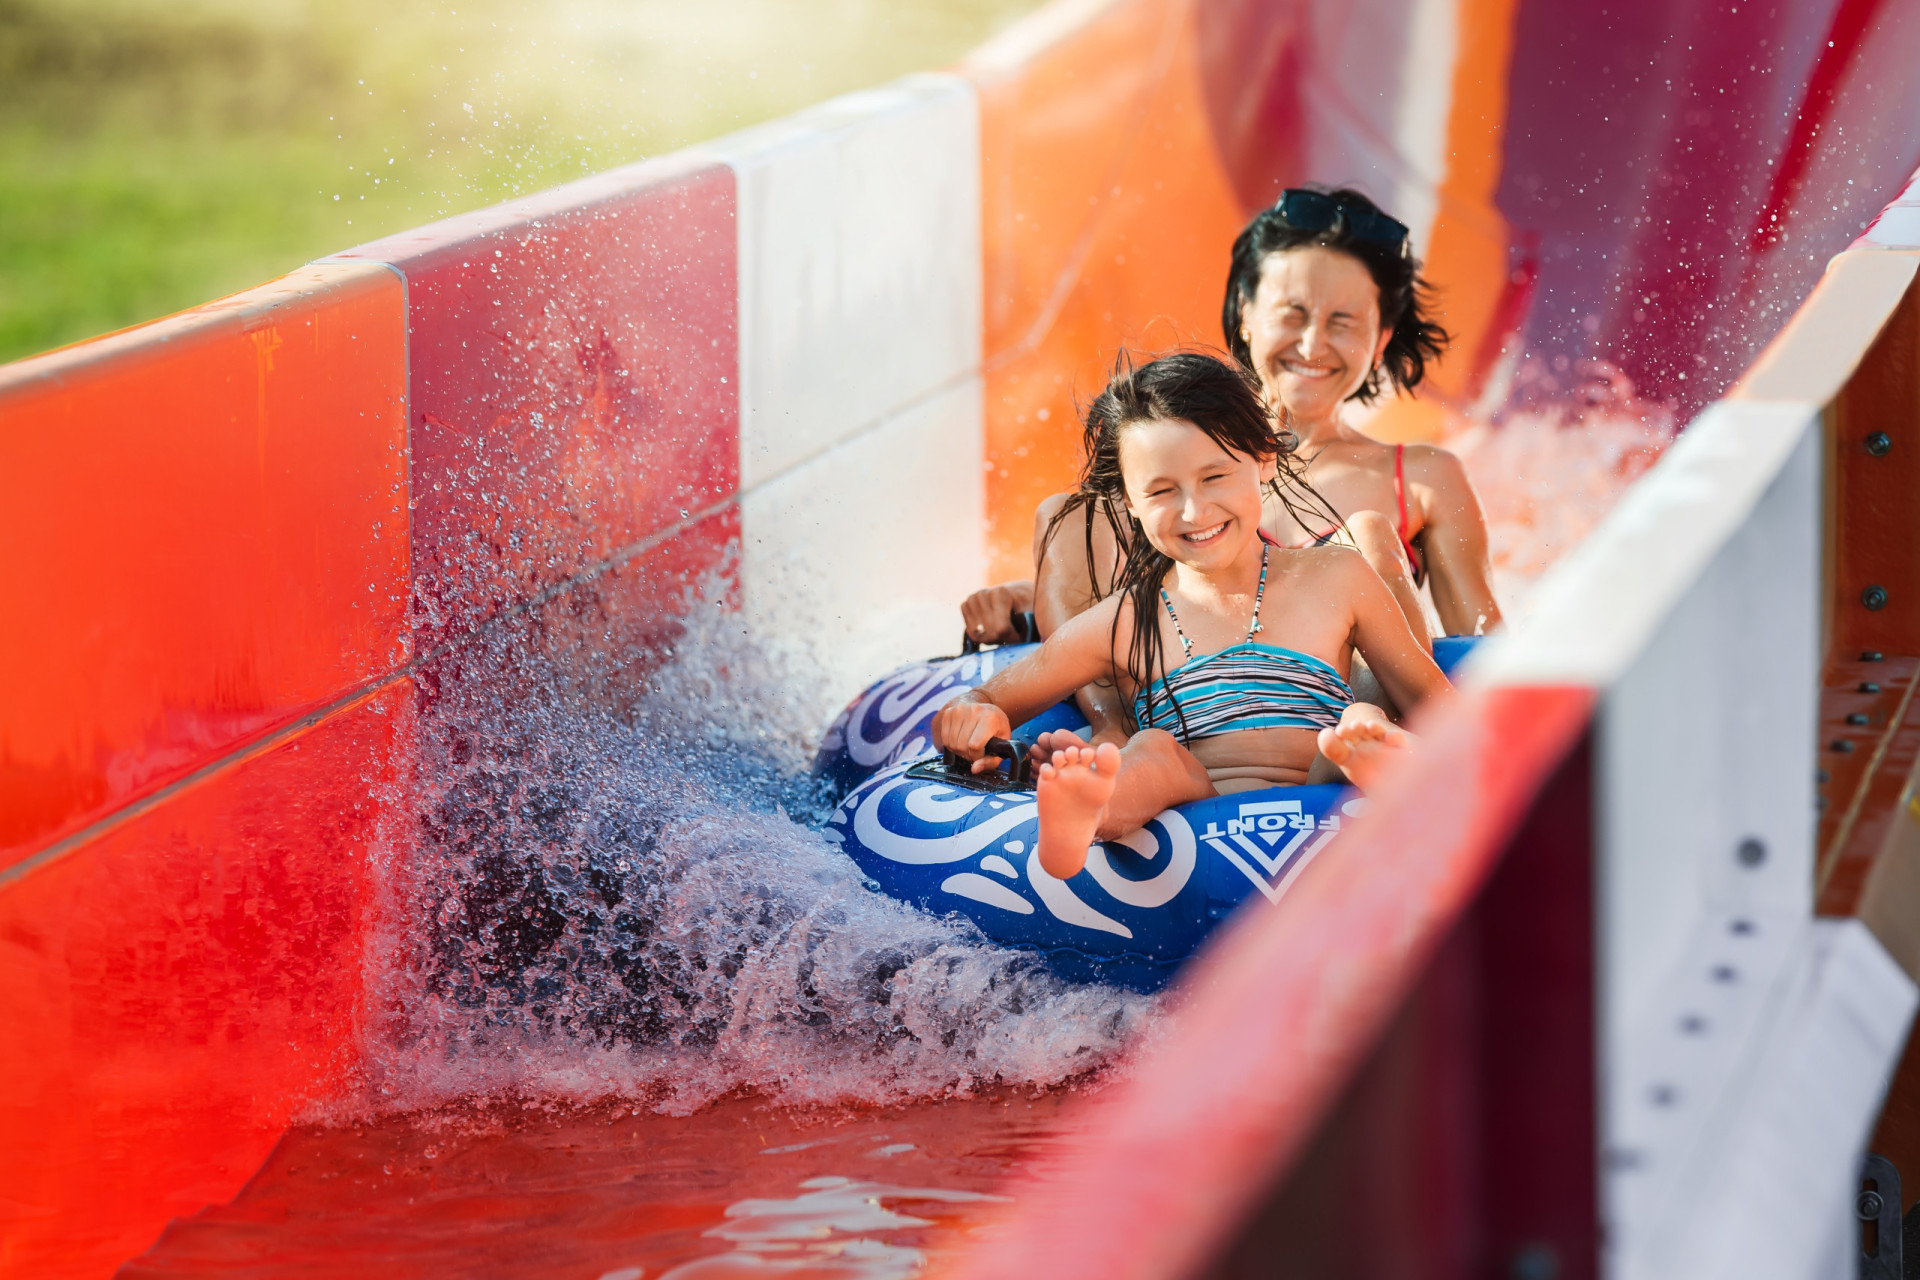 <p>Whether you're at your home or travelling abroad, water parks are always a fun place to head to with family or friends, especially during those hot summer days.</p> <p>Click here to see amazing water parks around the world!</p><p>You may also like:<a href="https://www.starsinsider.com/n/180785?utm_source=msn.com&utm_medium=display&utm_campaign=referral_description&utm_content=150139v2en-ae"> The highest grossing Hollywood actors of all time</a></p>